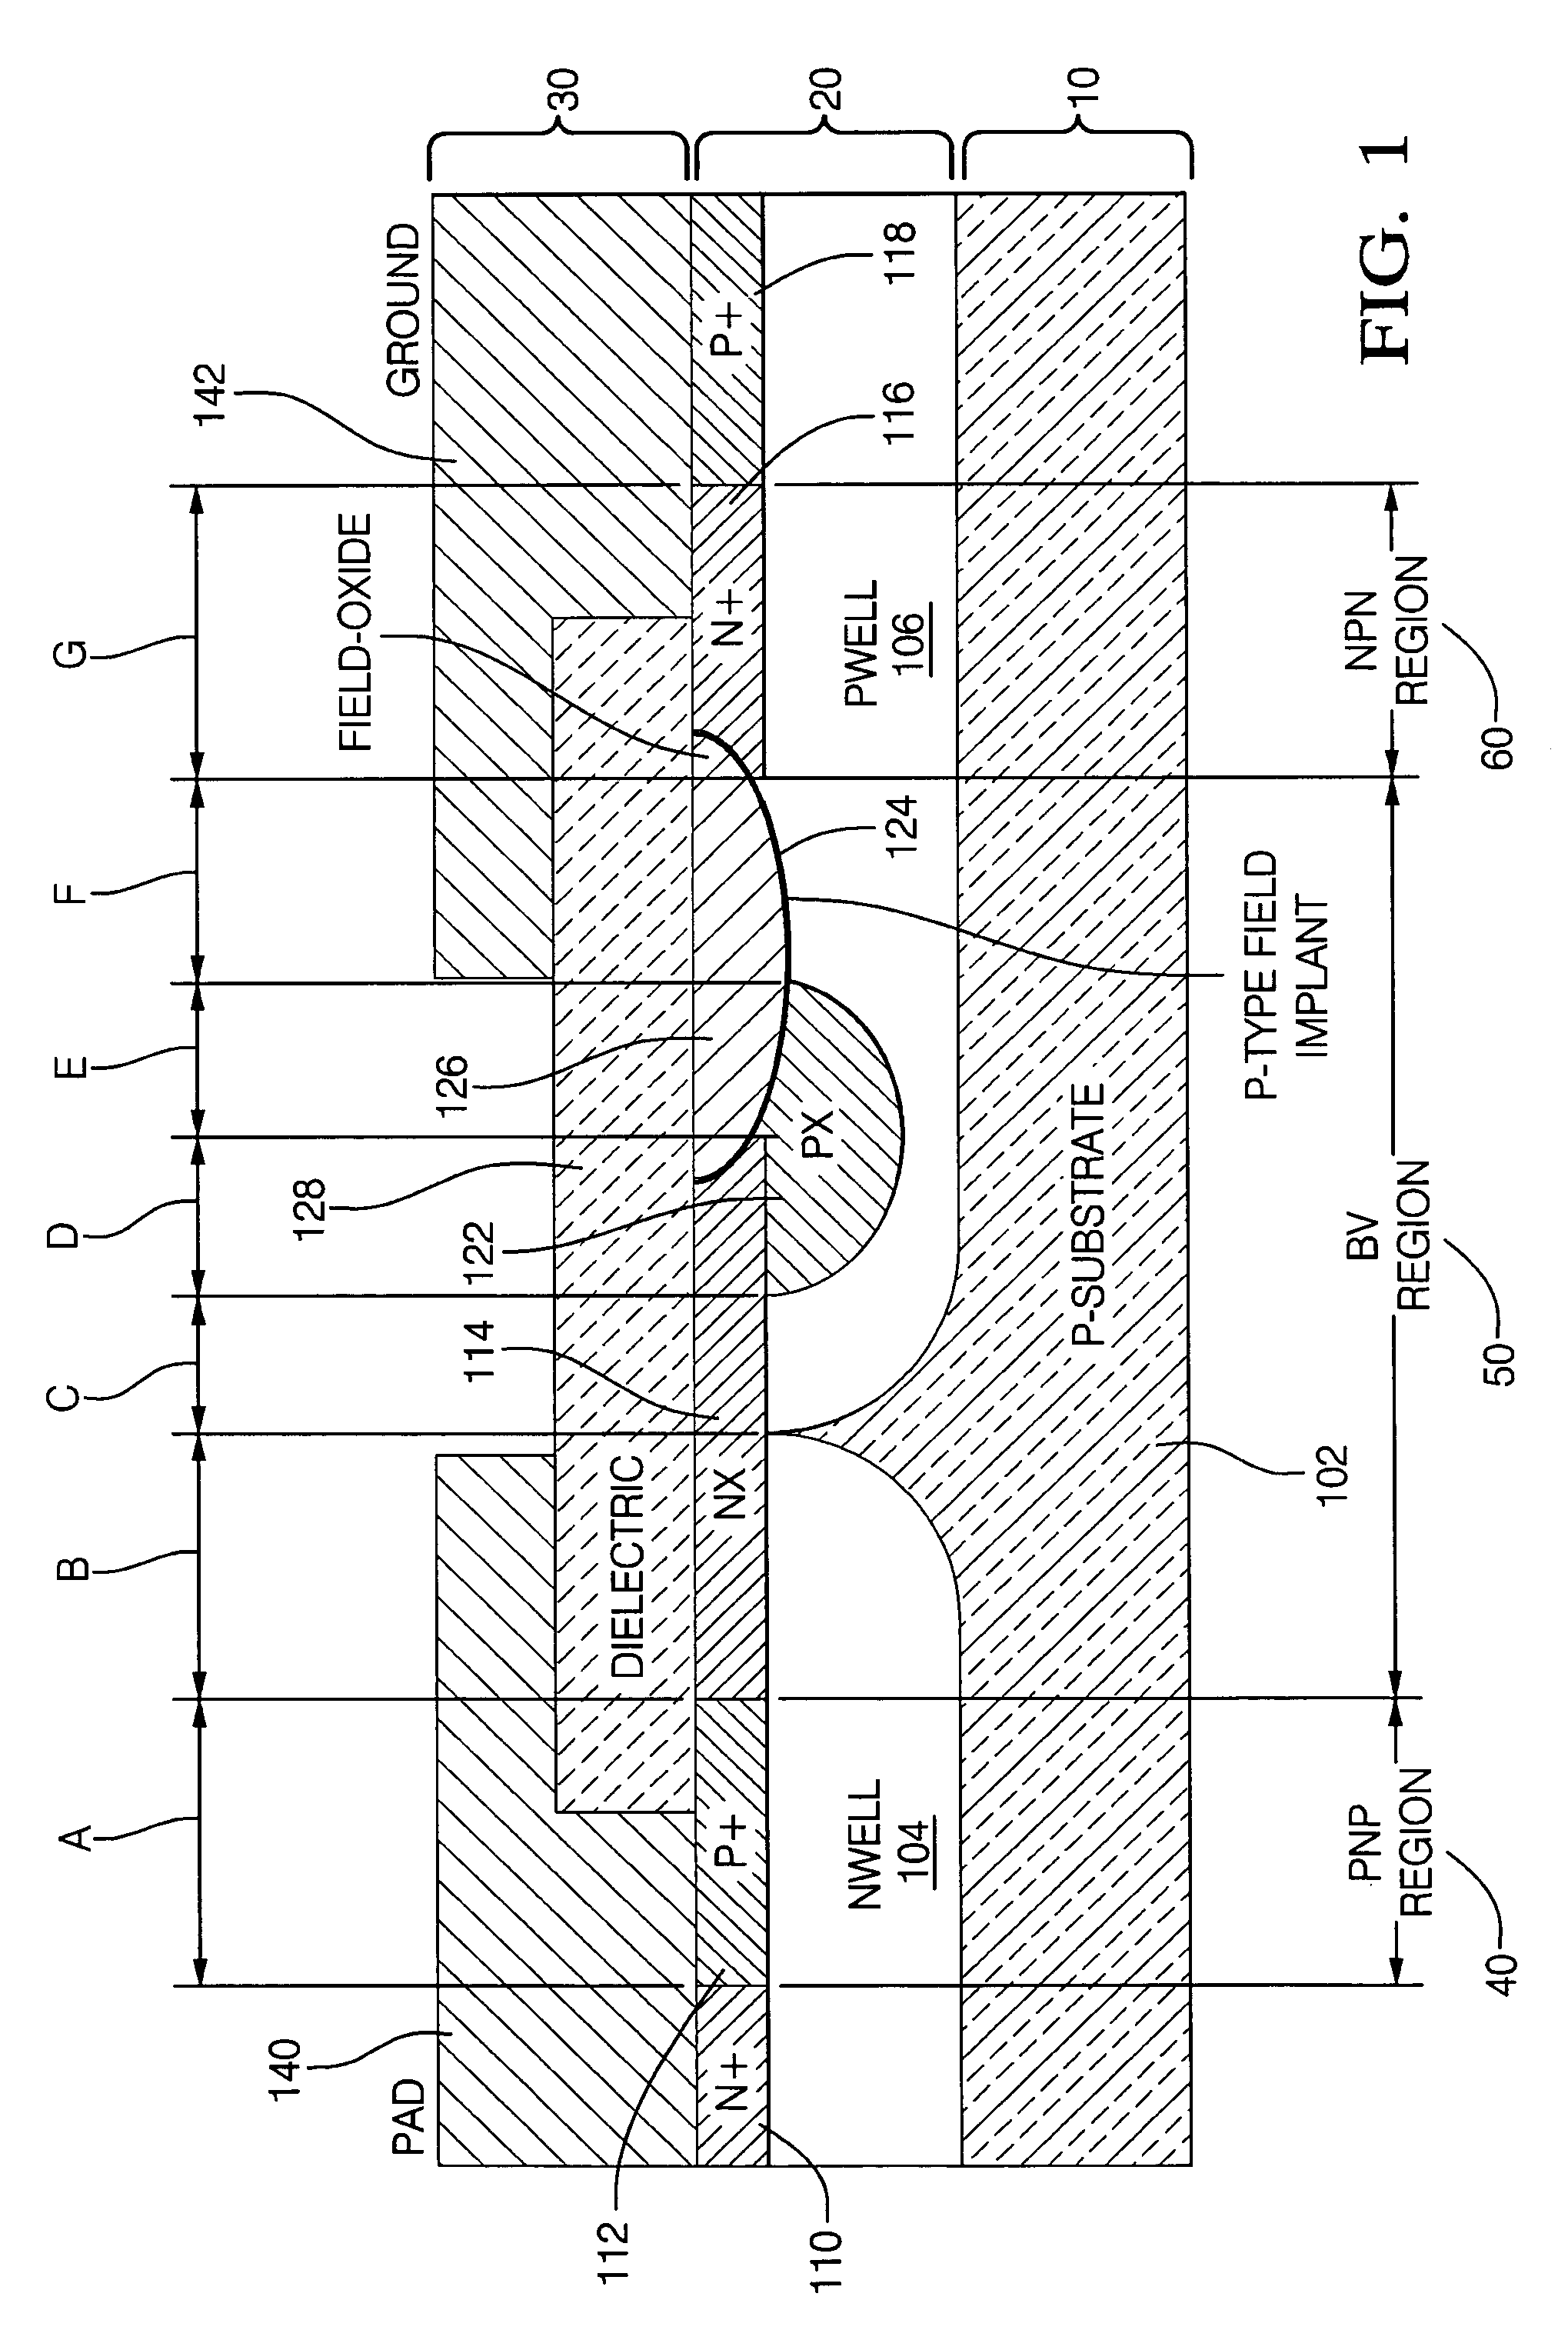 Method and apparatus for electrostatic discharge protection having a stable breakdown voltage and low snapback voltage